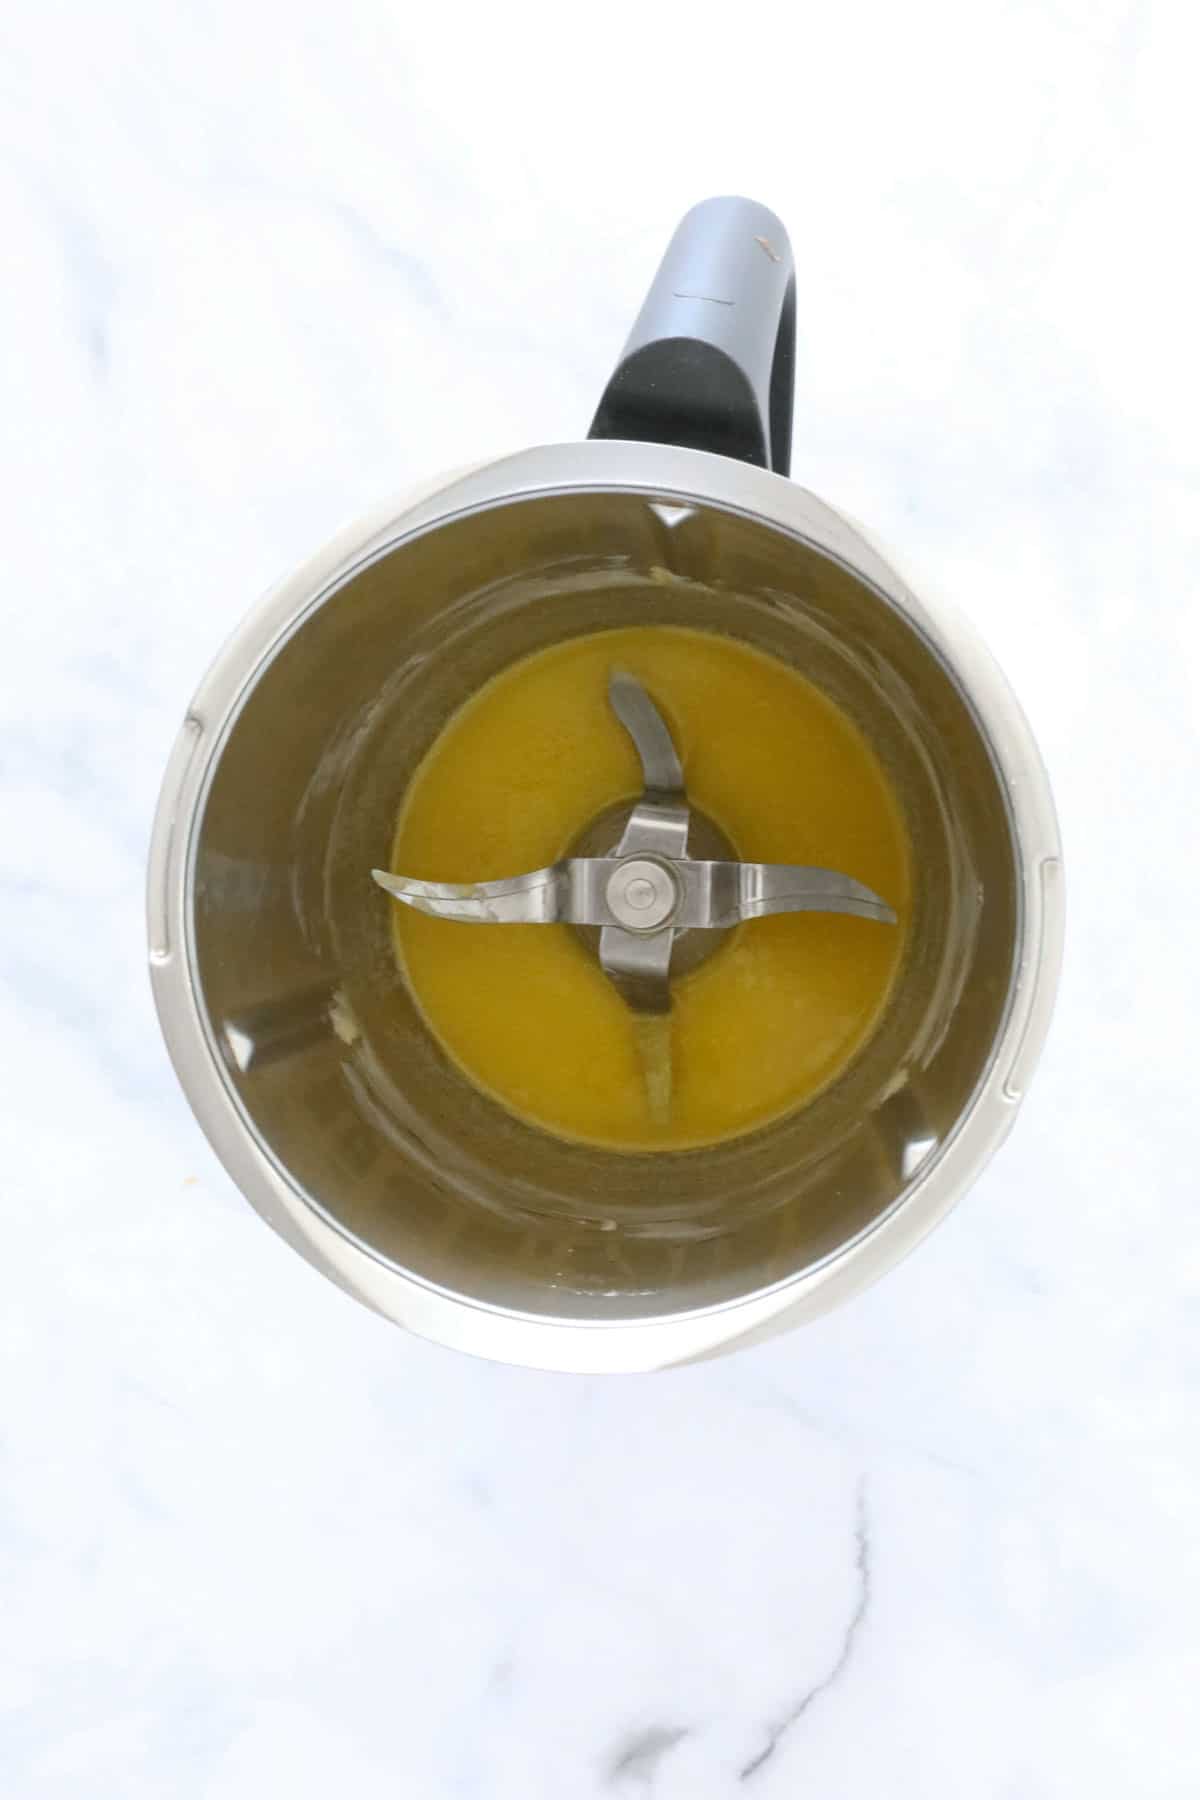 Melted butter in a Thermomix.